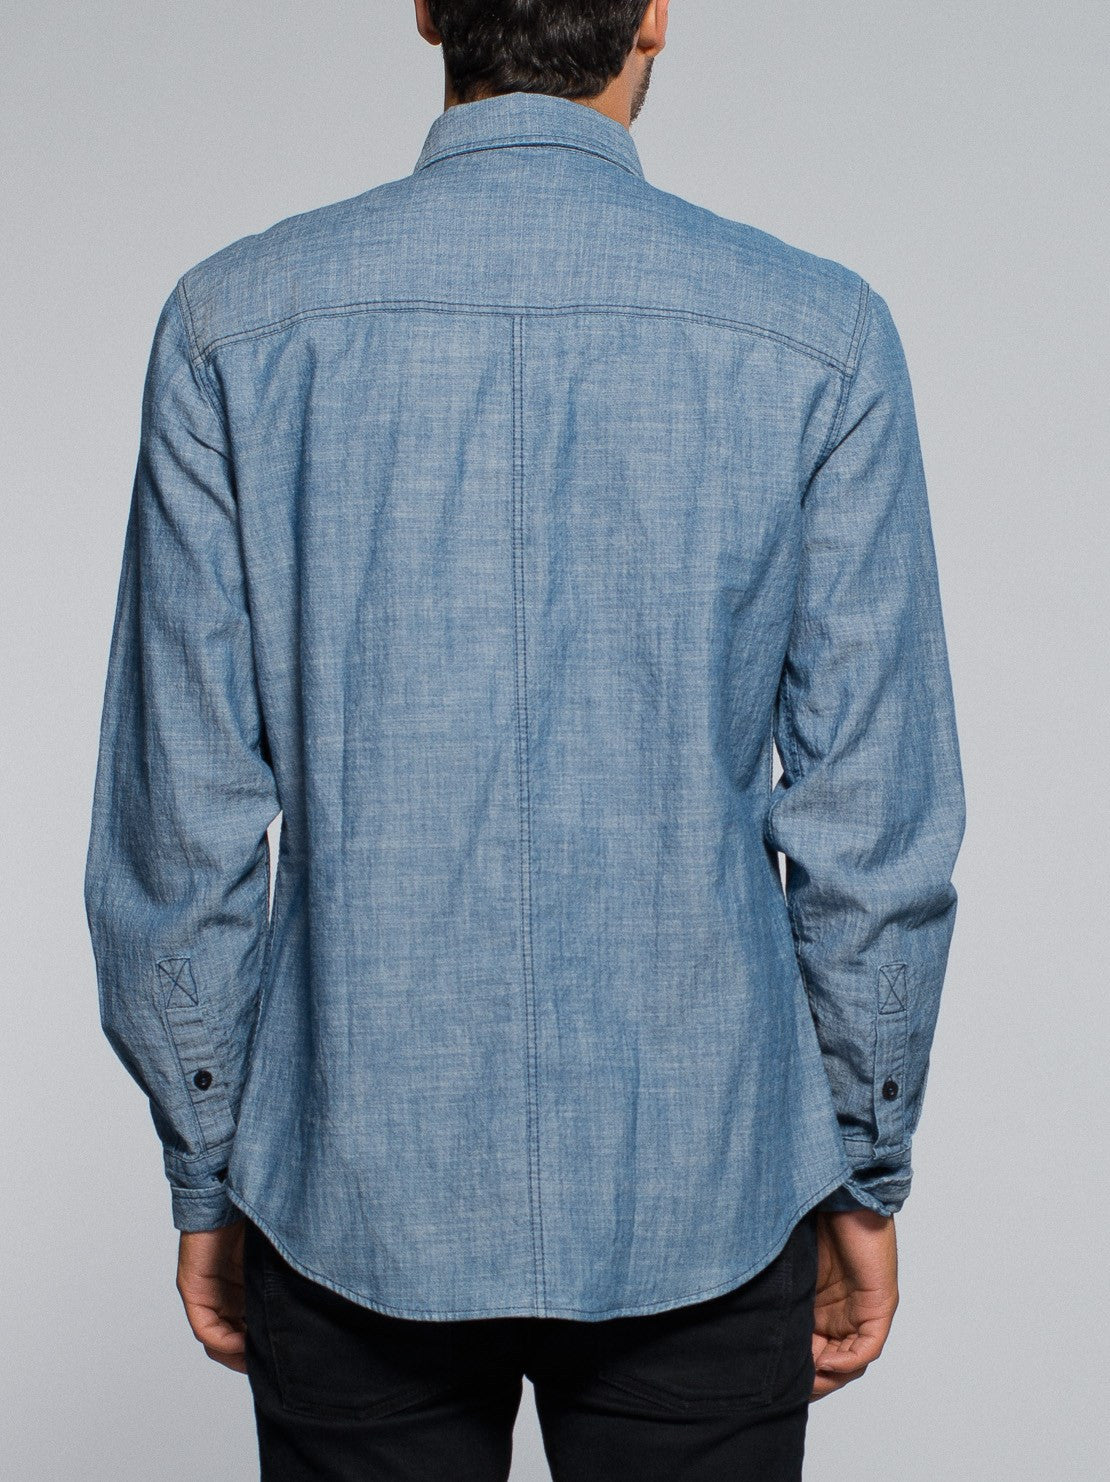 Nudie Jeans Gunnar Organic Chambray - Supply Co